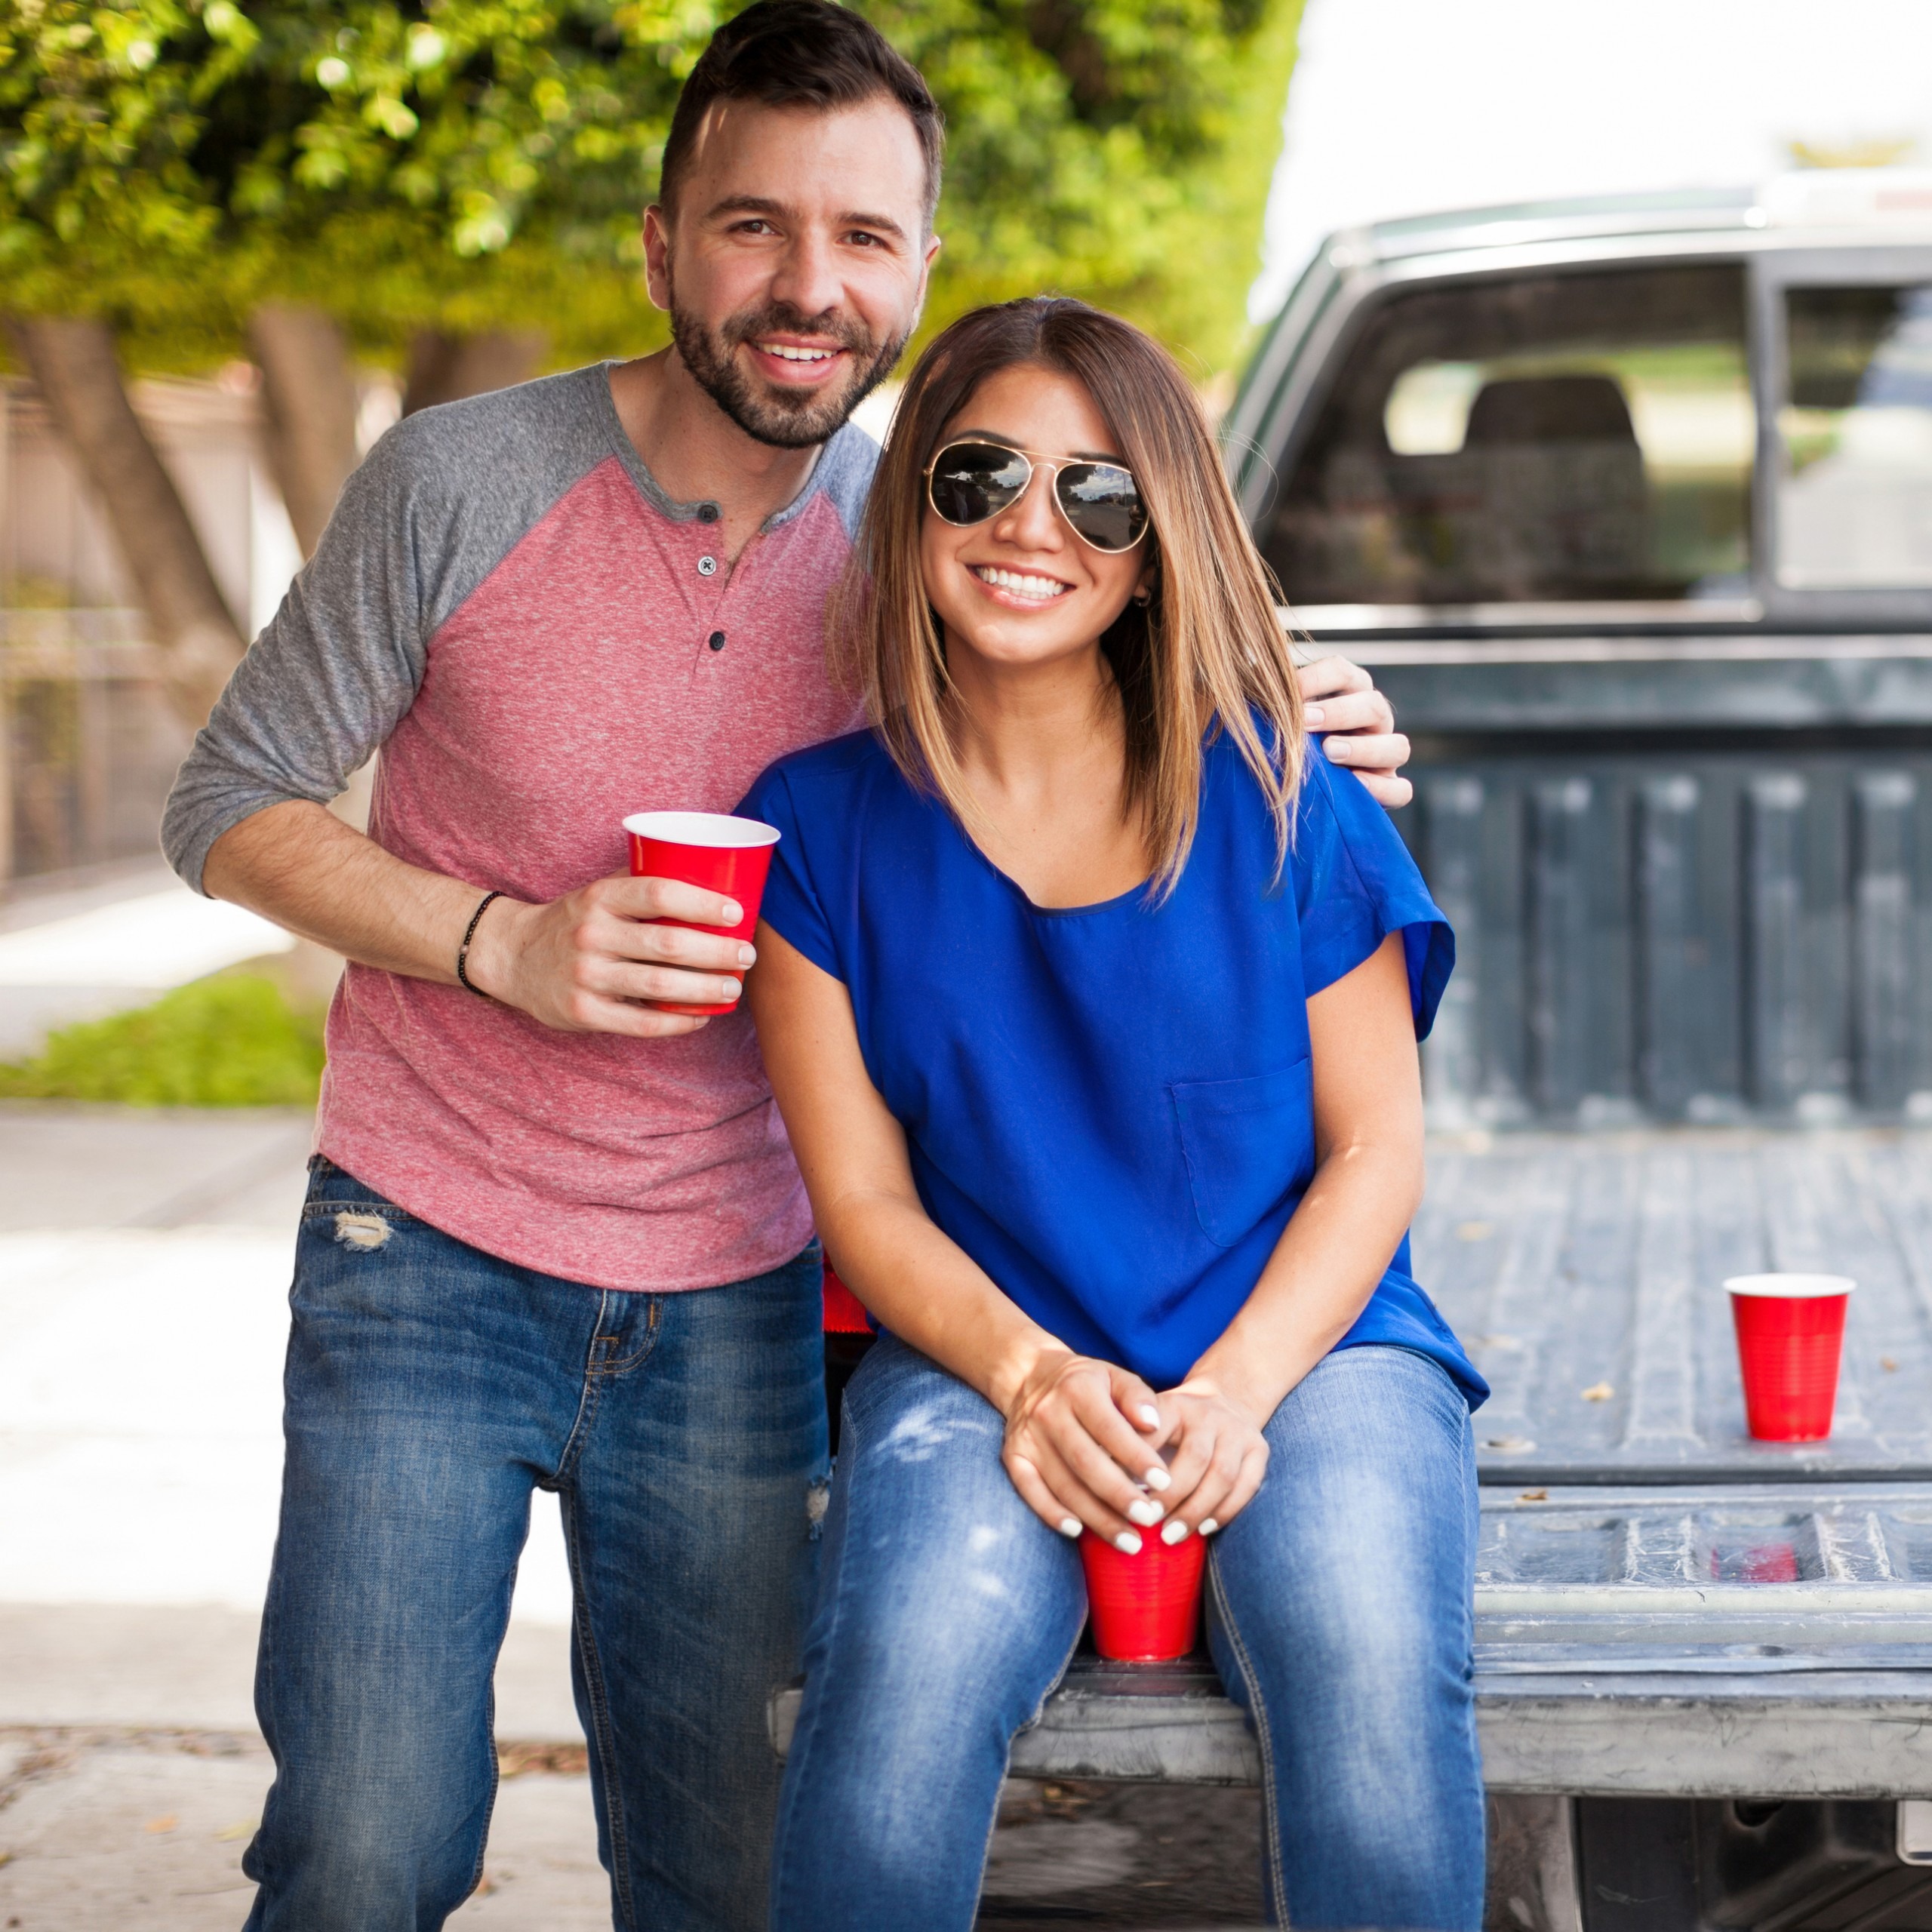 How To Tailgate And Lose Weight